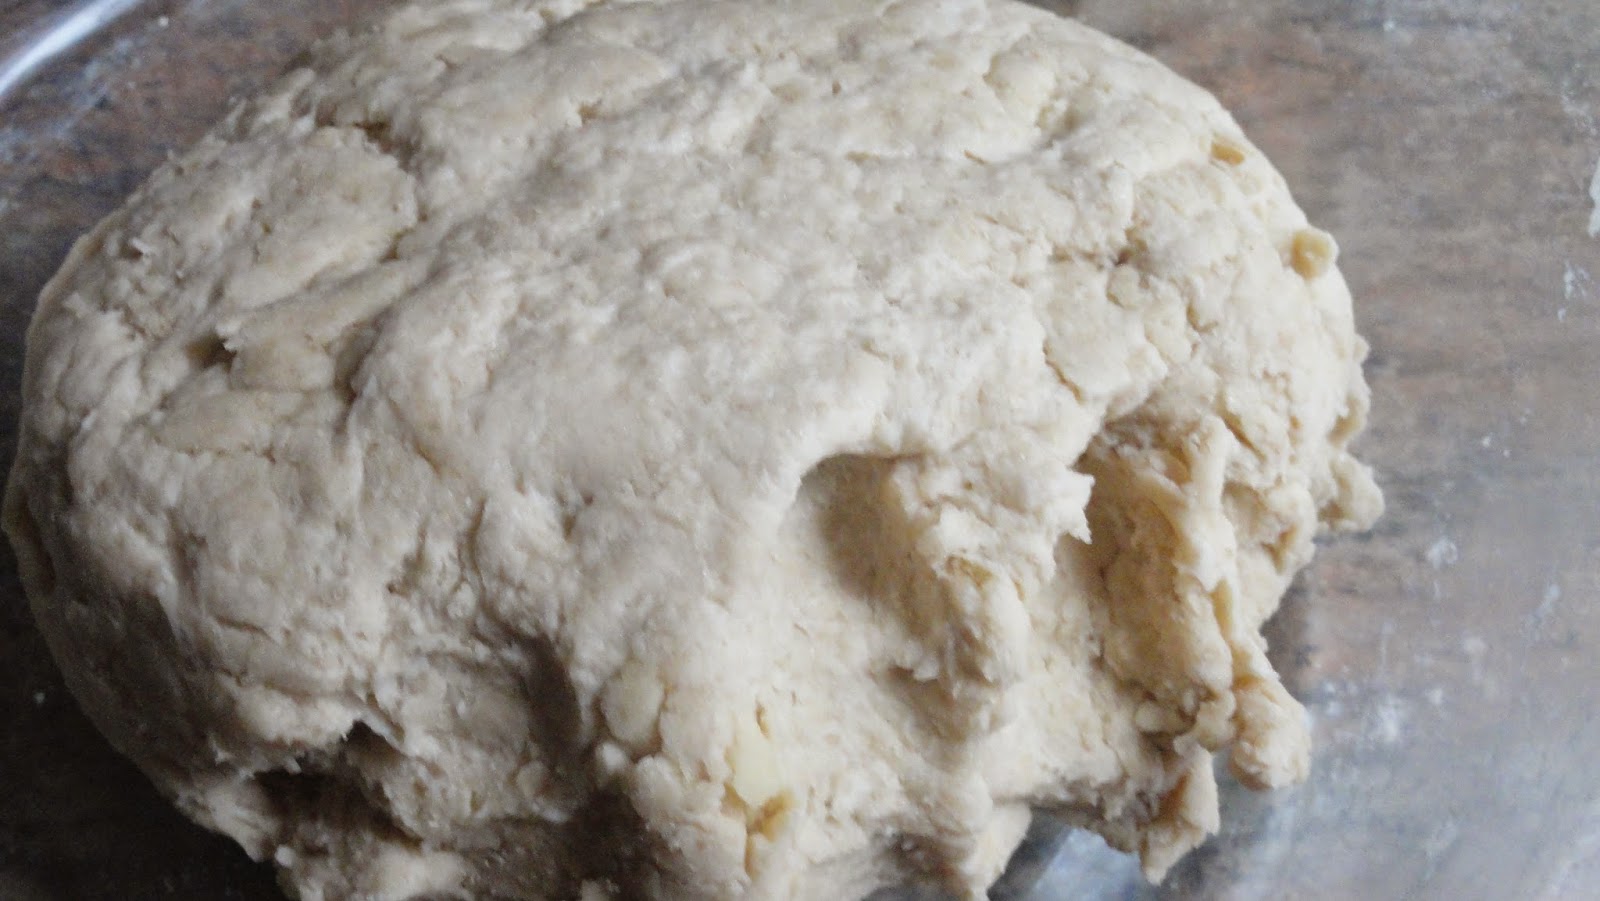 Add water and knead it